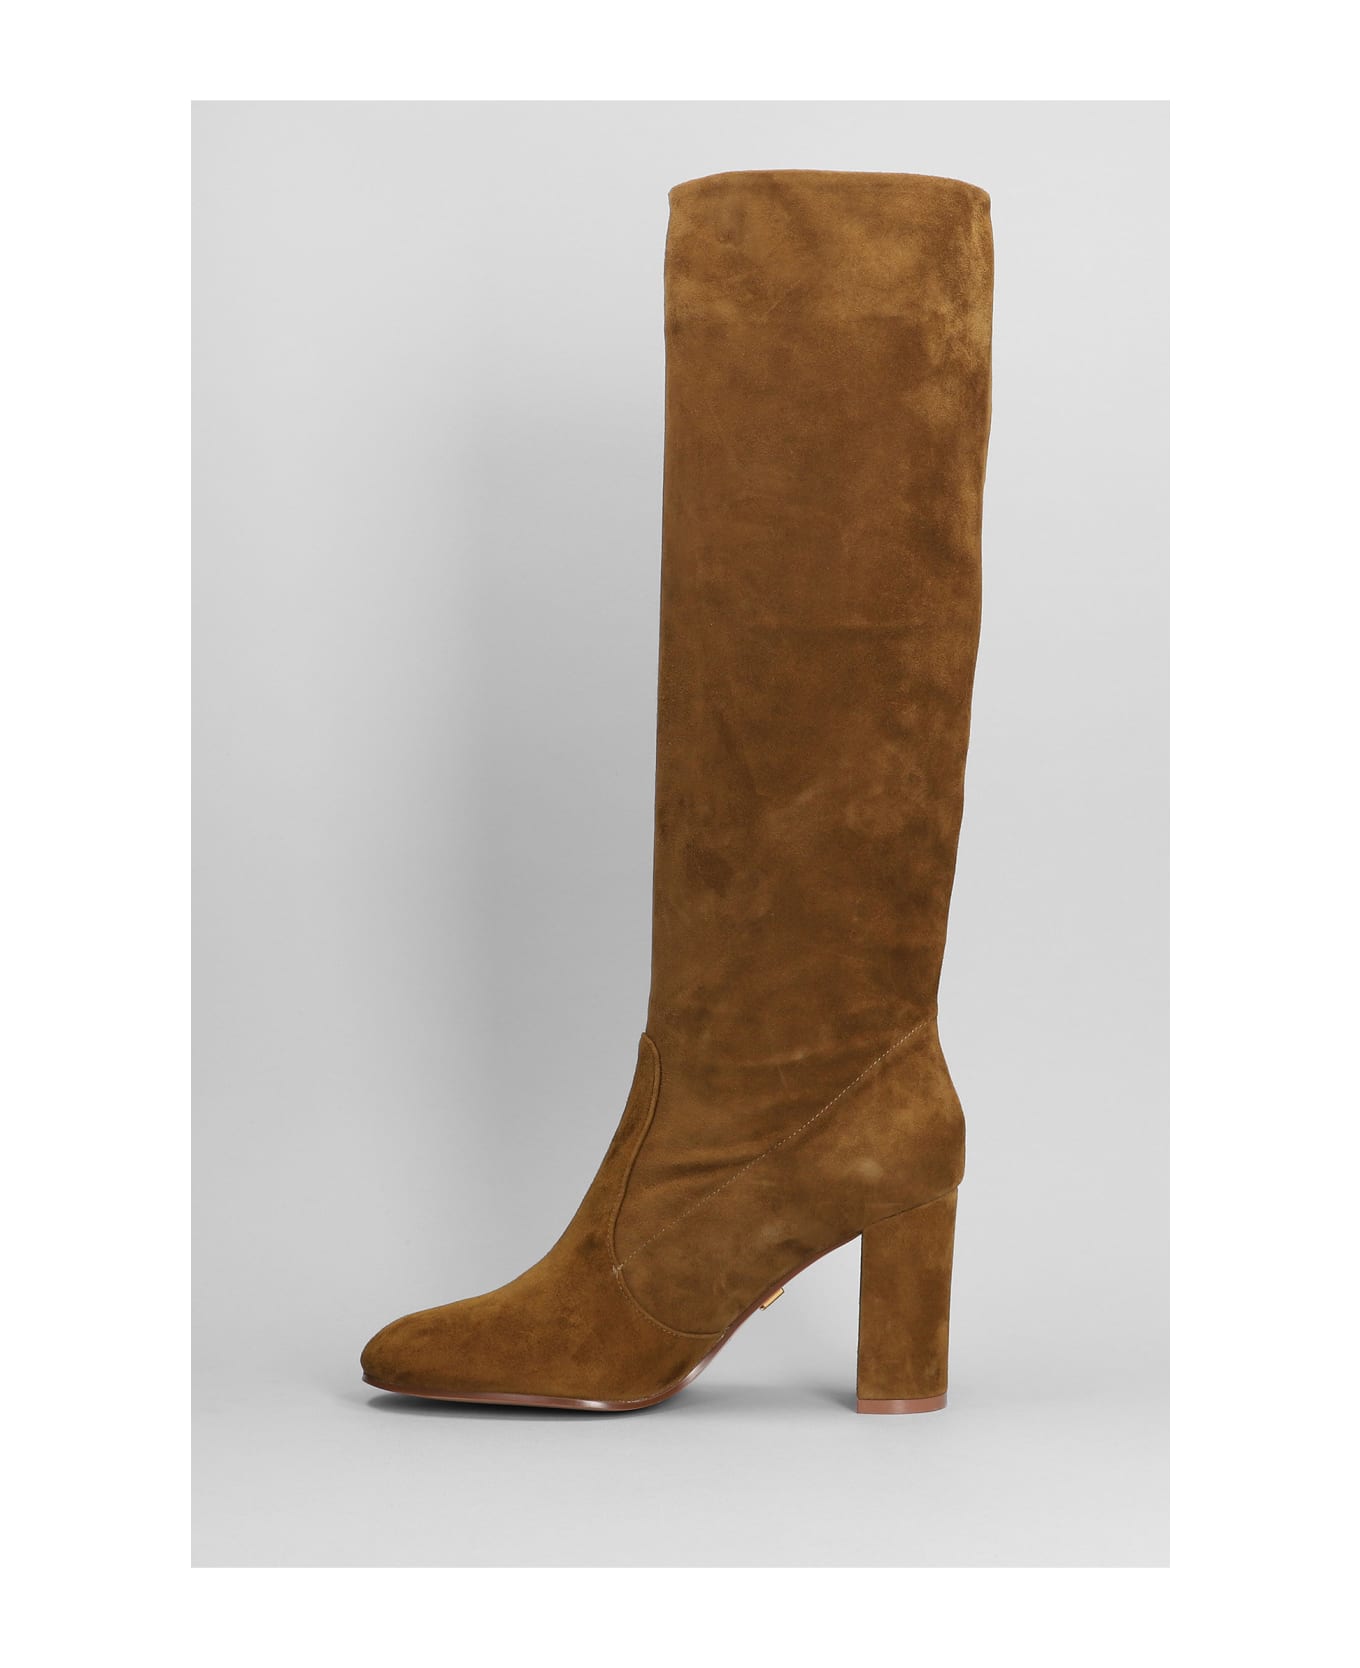 Lola Cruz High Heels Boots In Leather Color Suede - leather color